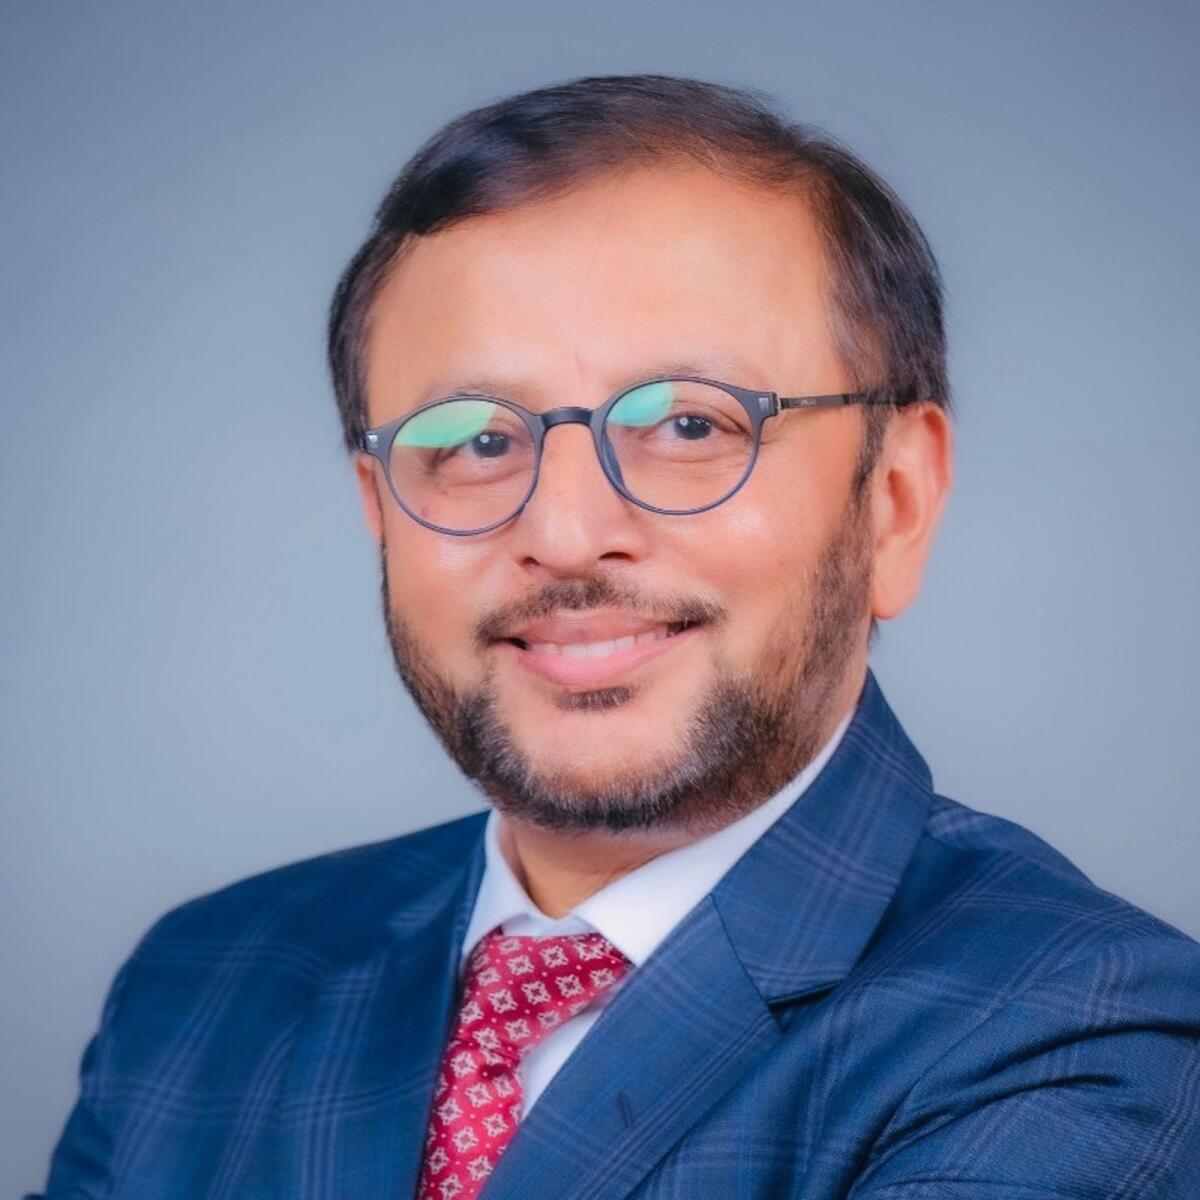 Atik Munshi, managing partner at FinExpertiza UAE, said the UAE and the other GCC countries have witnessed a decent growth in businesses during 2022.